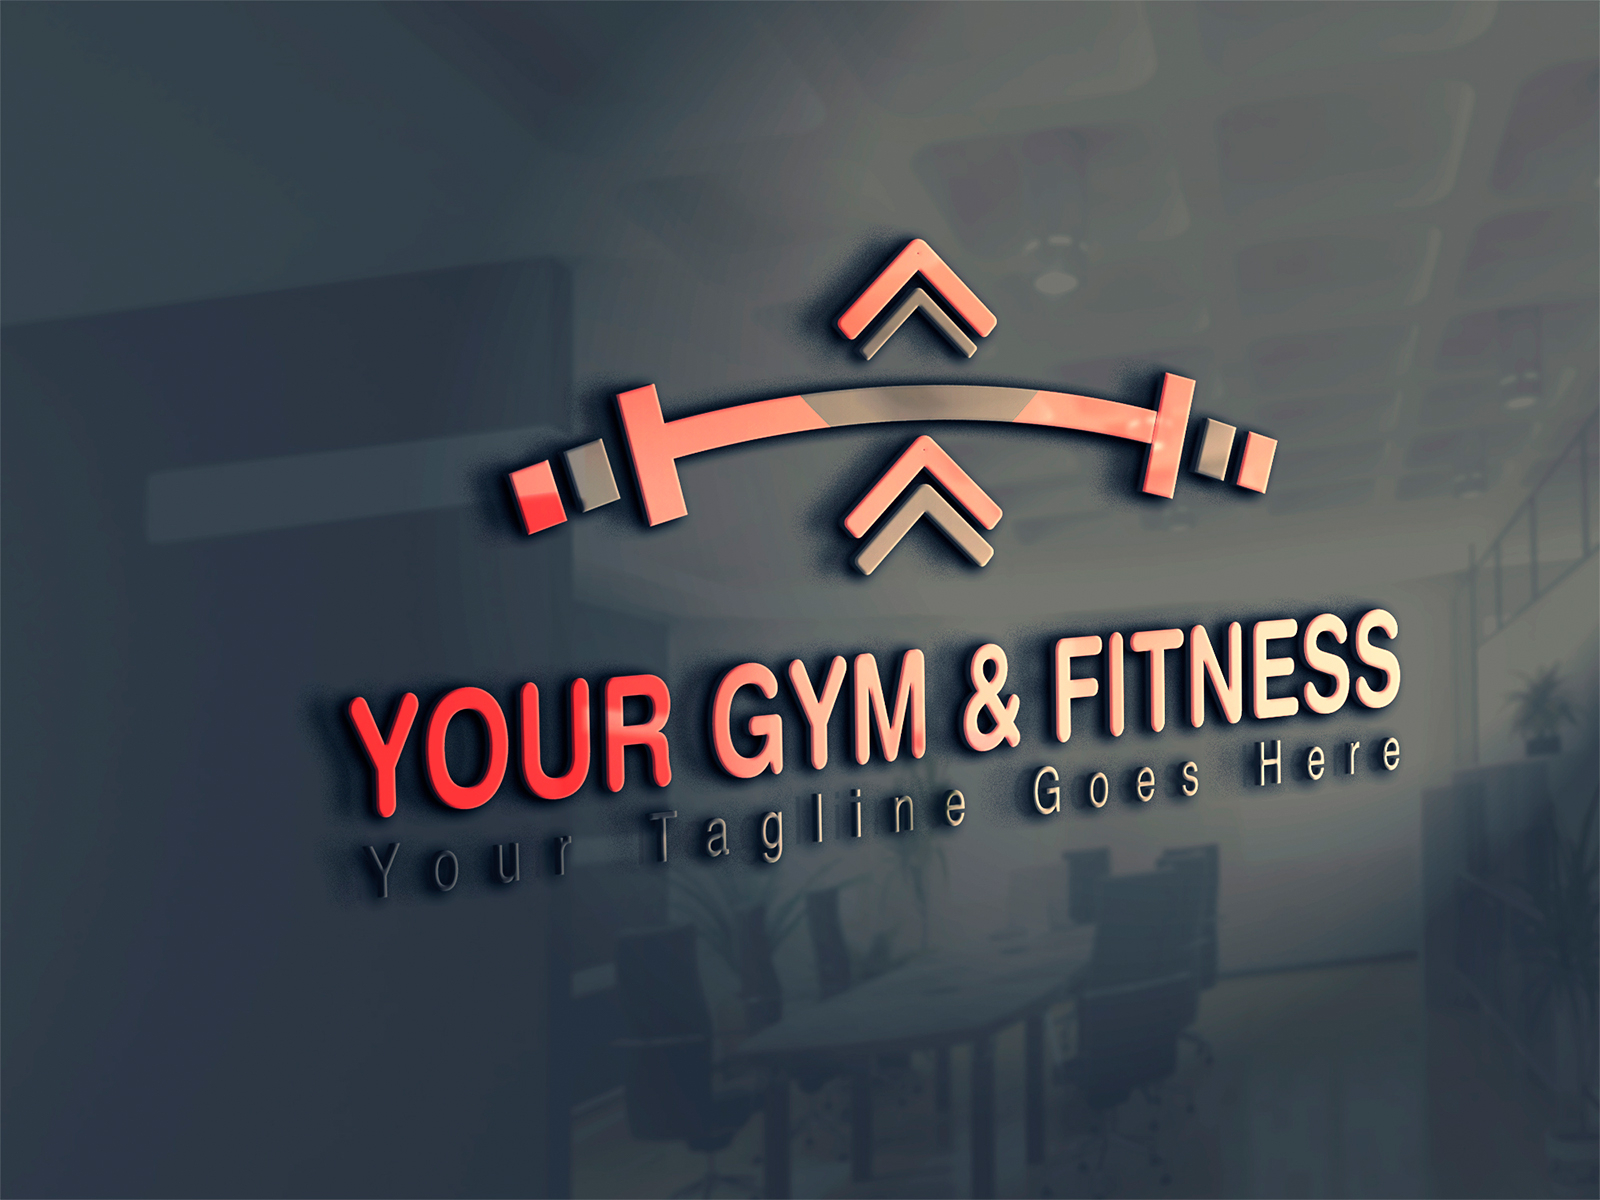 Gym and Fitness Logo by Md Shamsul Haque on Dribbble